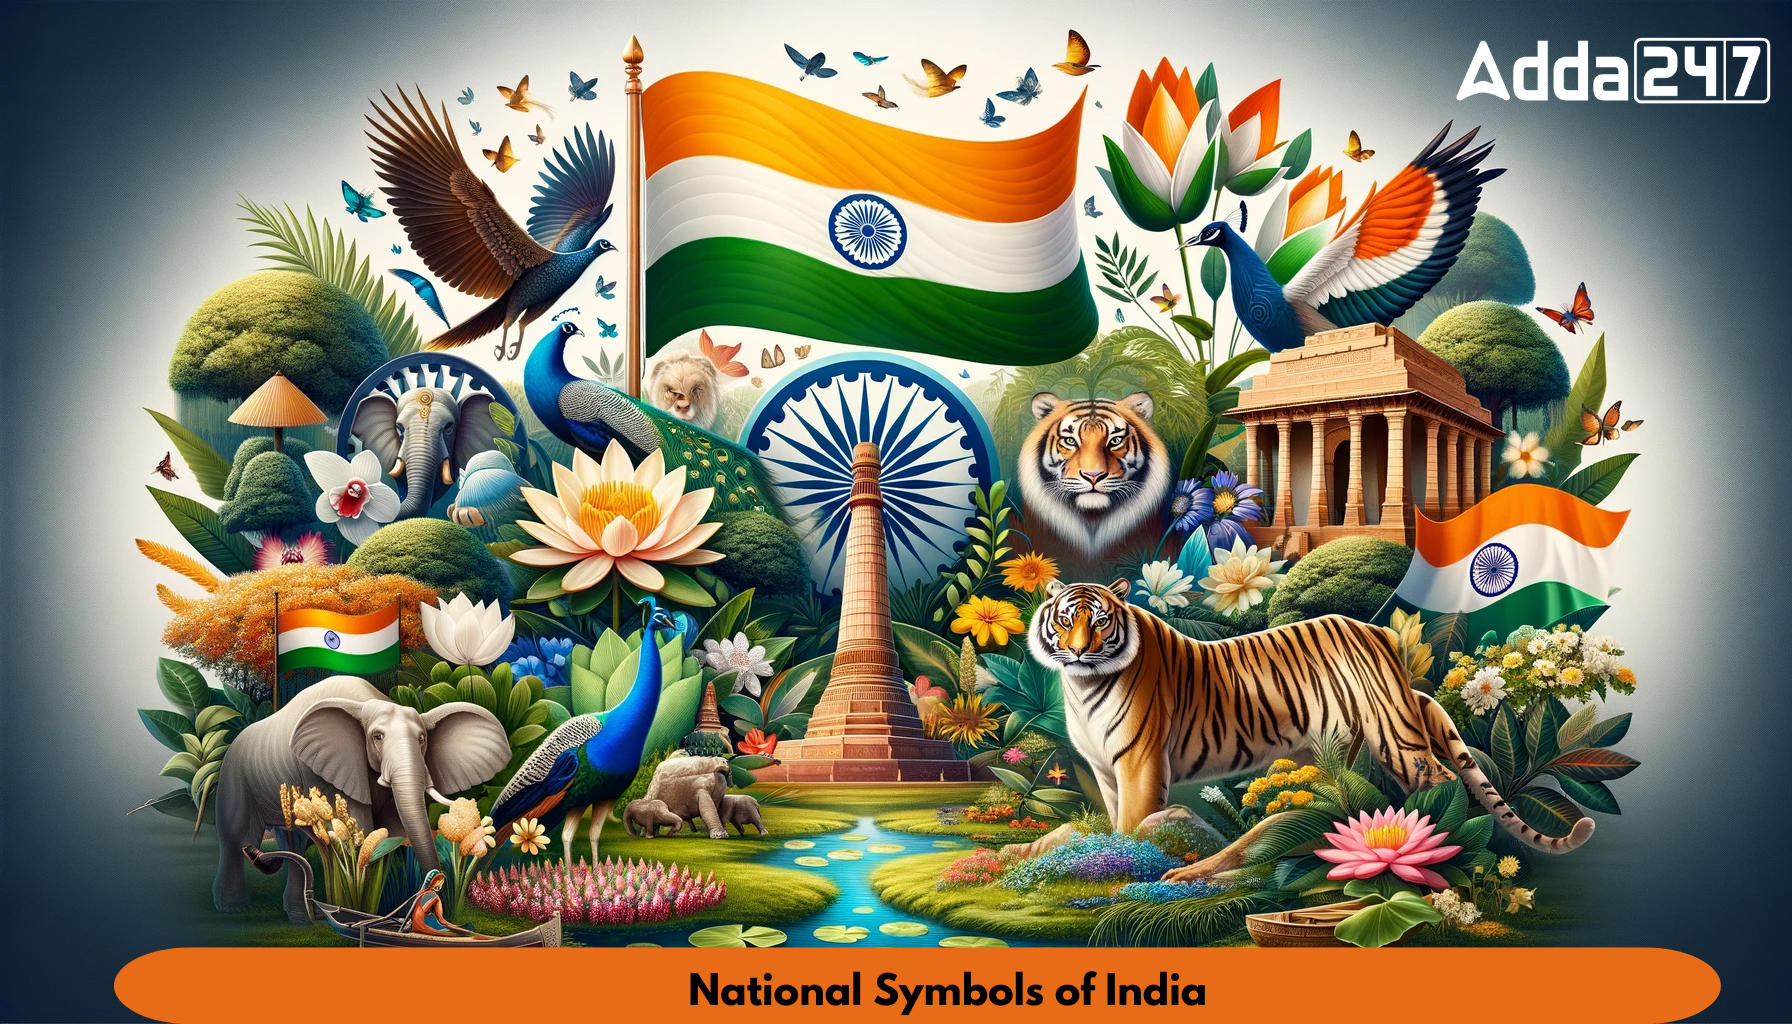 National Symbols of India: Check Complete List of Symbols